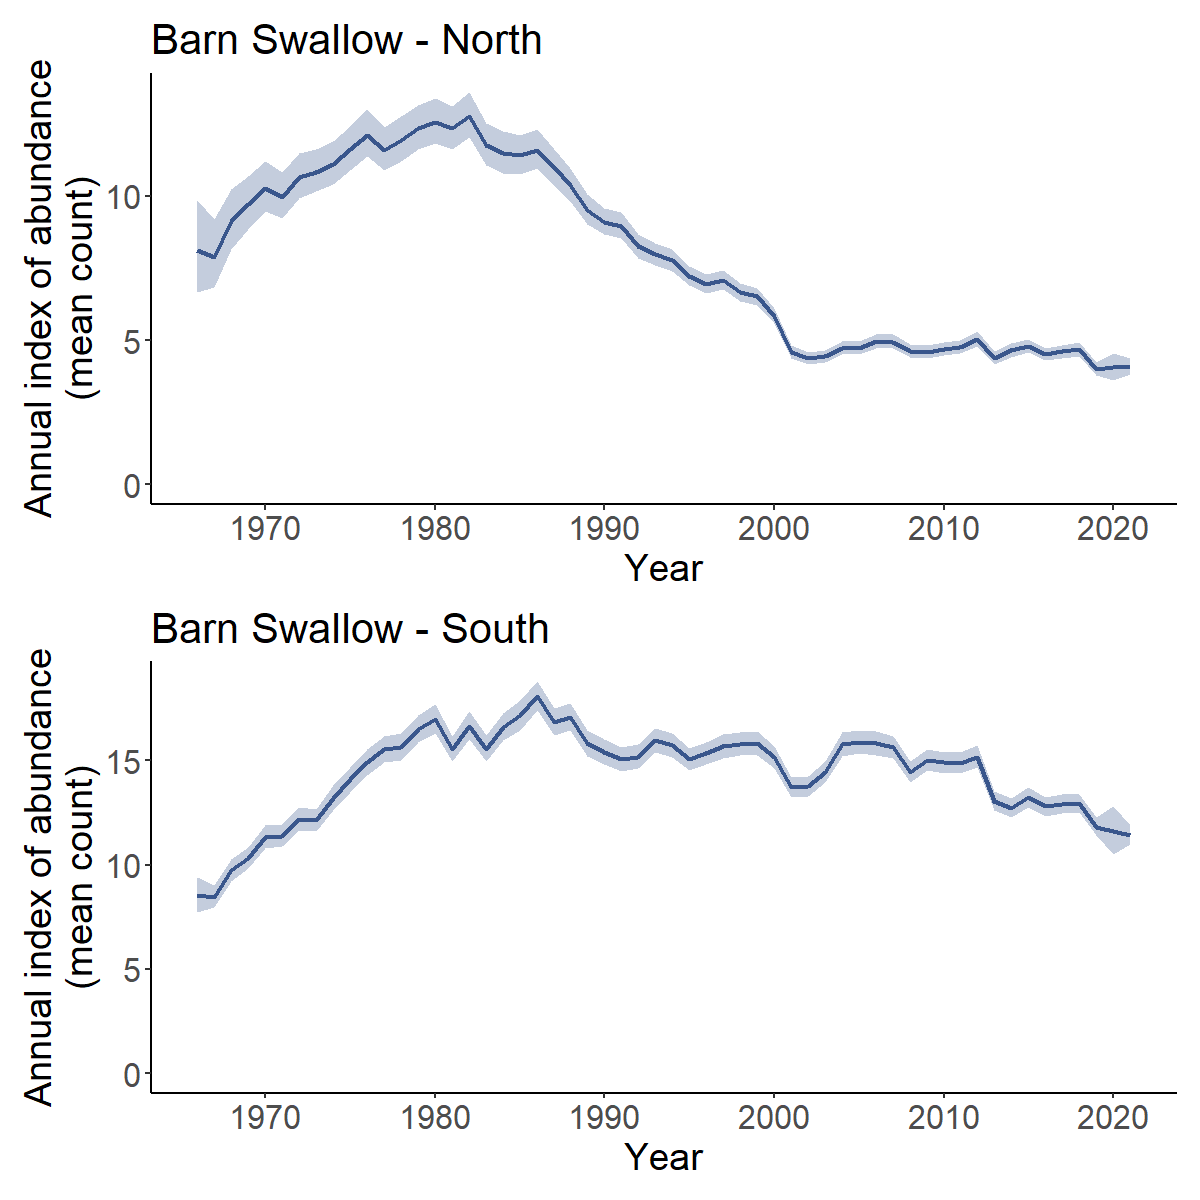 Population trajectories for Barn Swallow in the northern and southern parts of their range